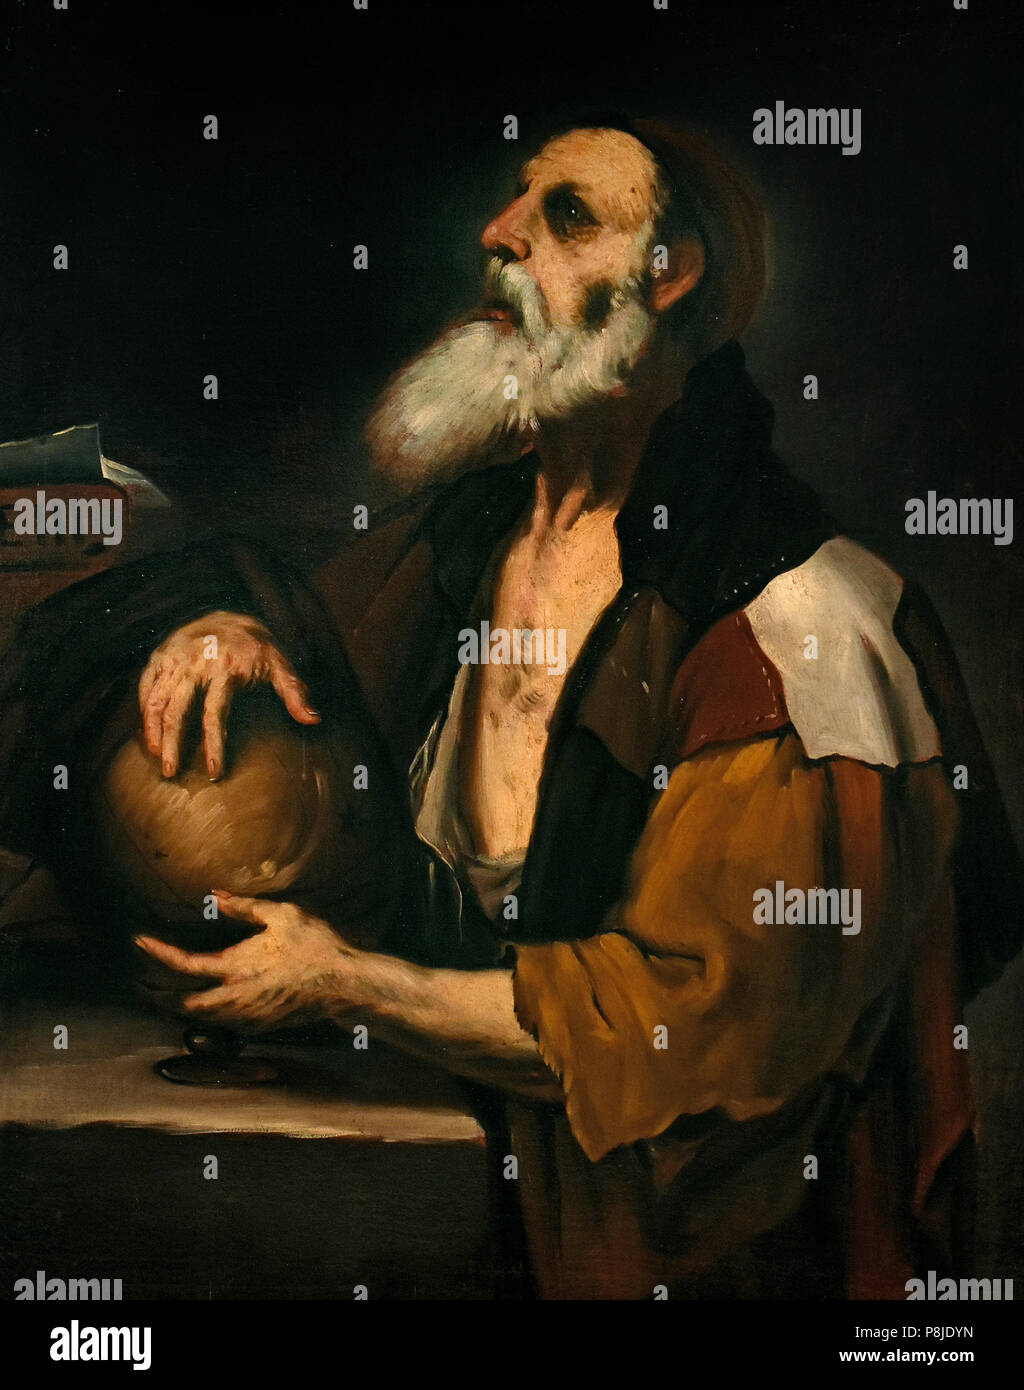 Archimedes by Luca Giordano 1632-1705 Italy Italian ( Archimedes of Syracuse 287 – 212 BC was a Greek mathematician, physicist, engineer, inventor, and astronomer.) Stock Photo